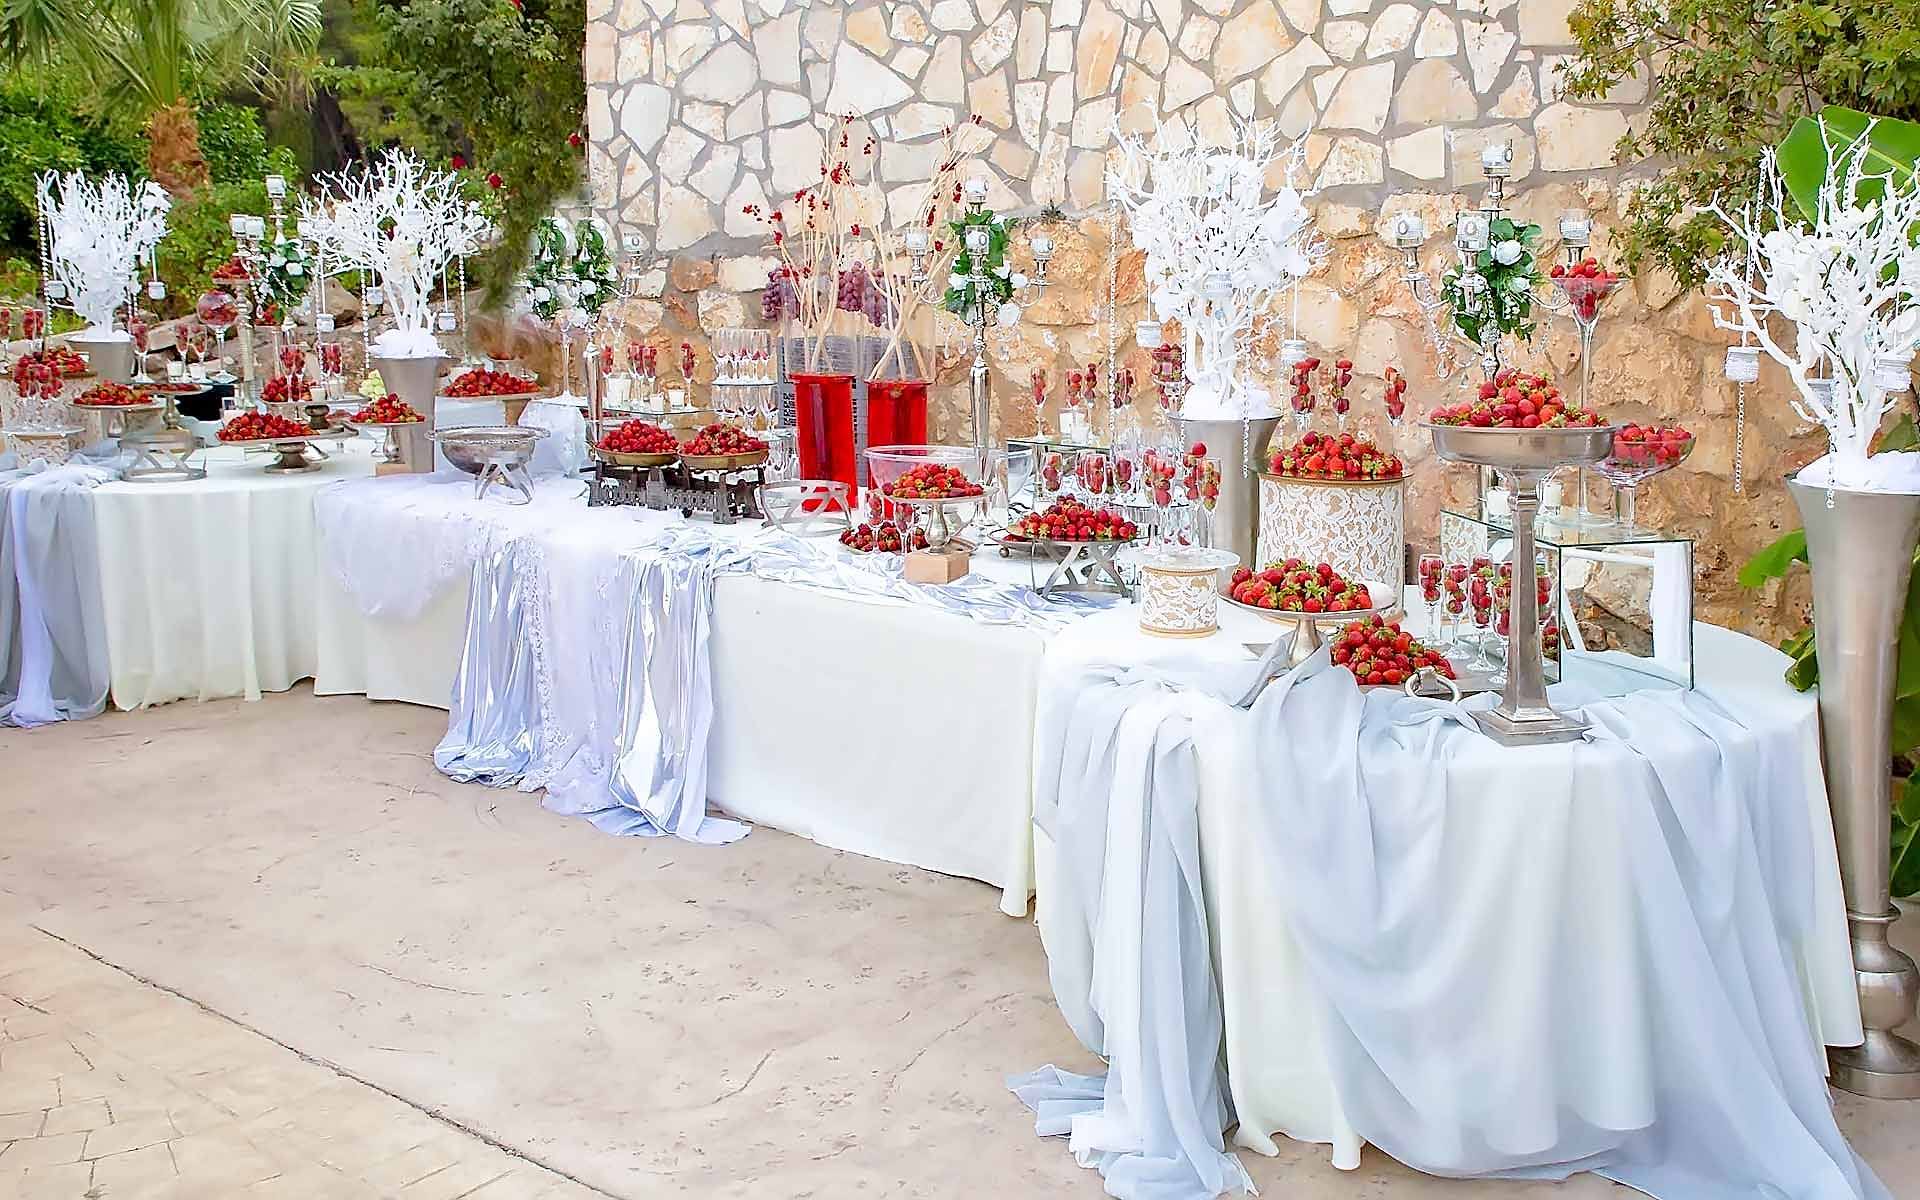 Impressive-Buffet-With-Strawberries-Champagnes-by-Diamond-Events